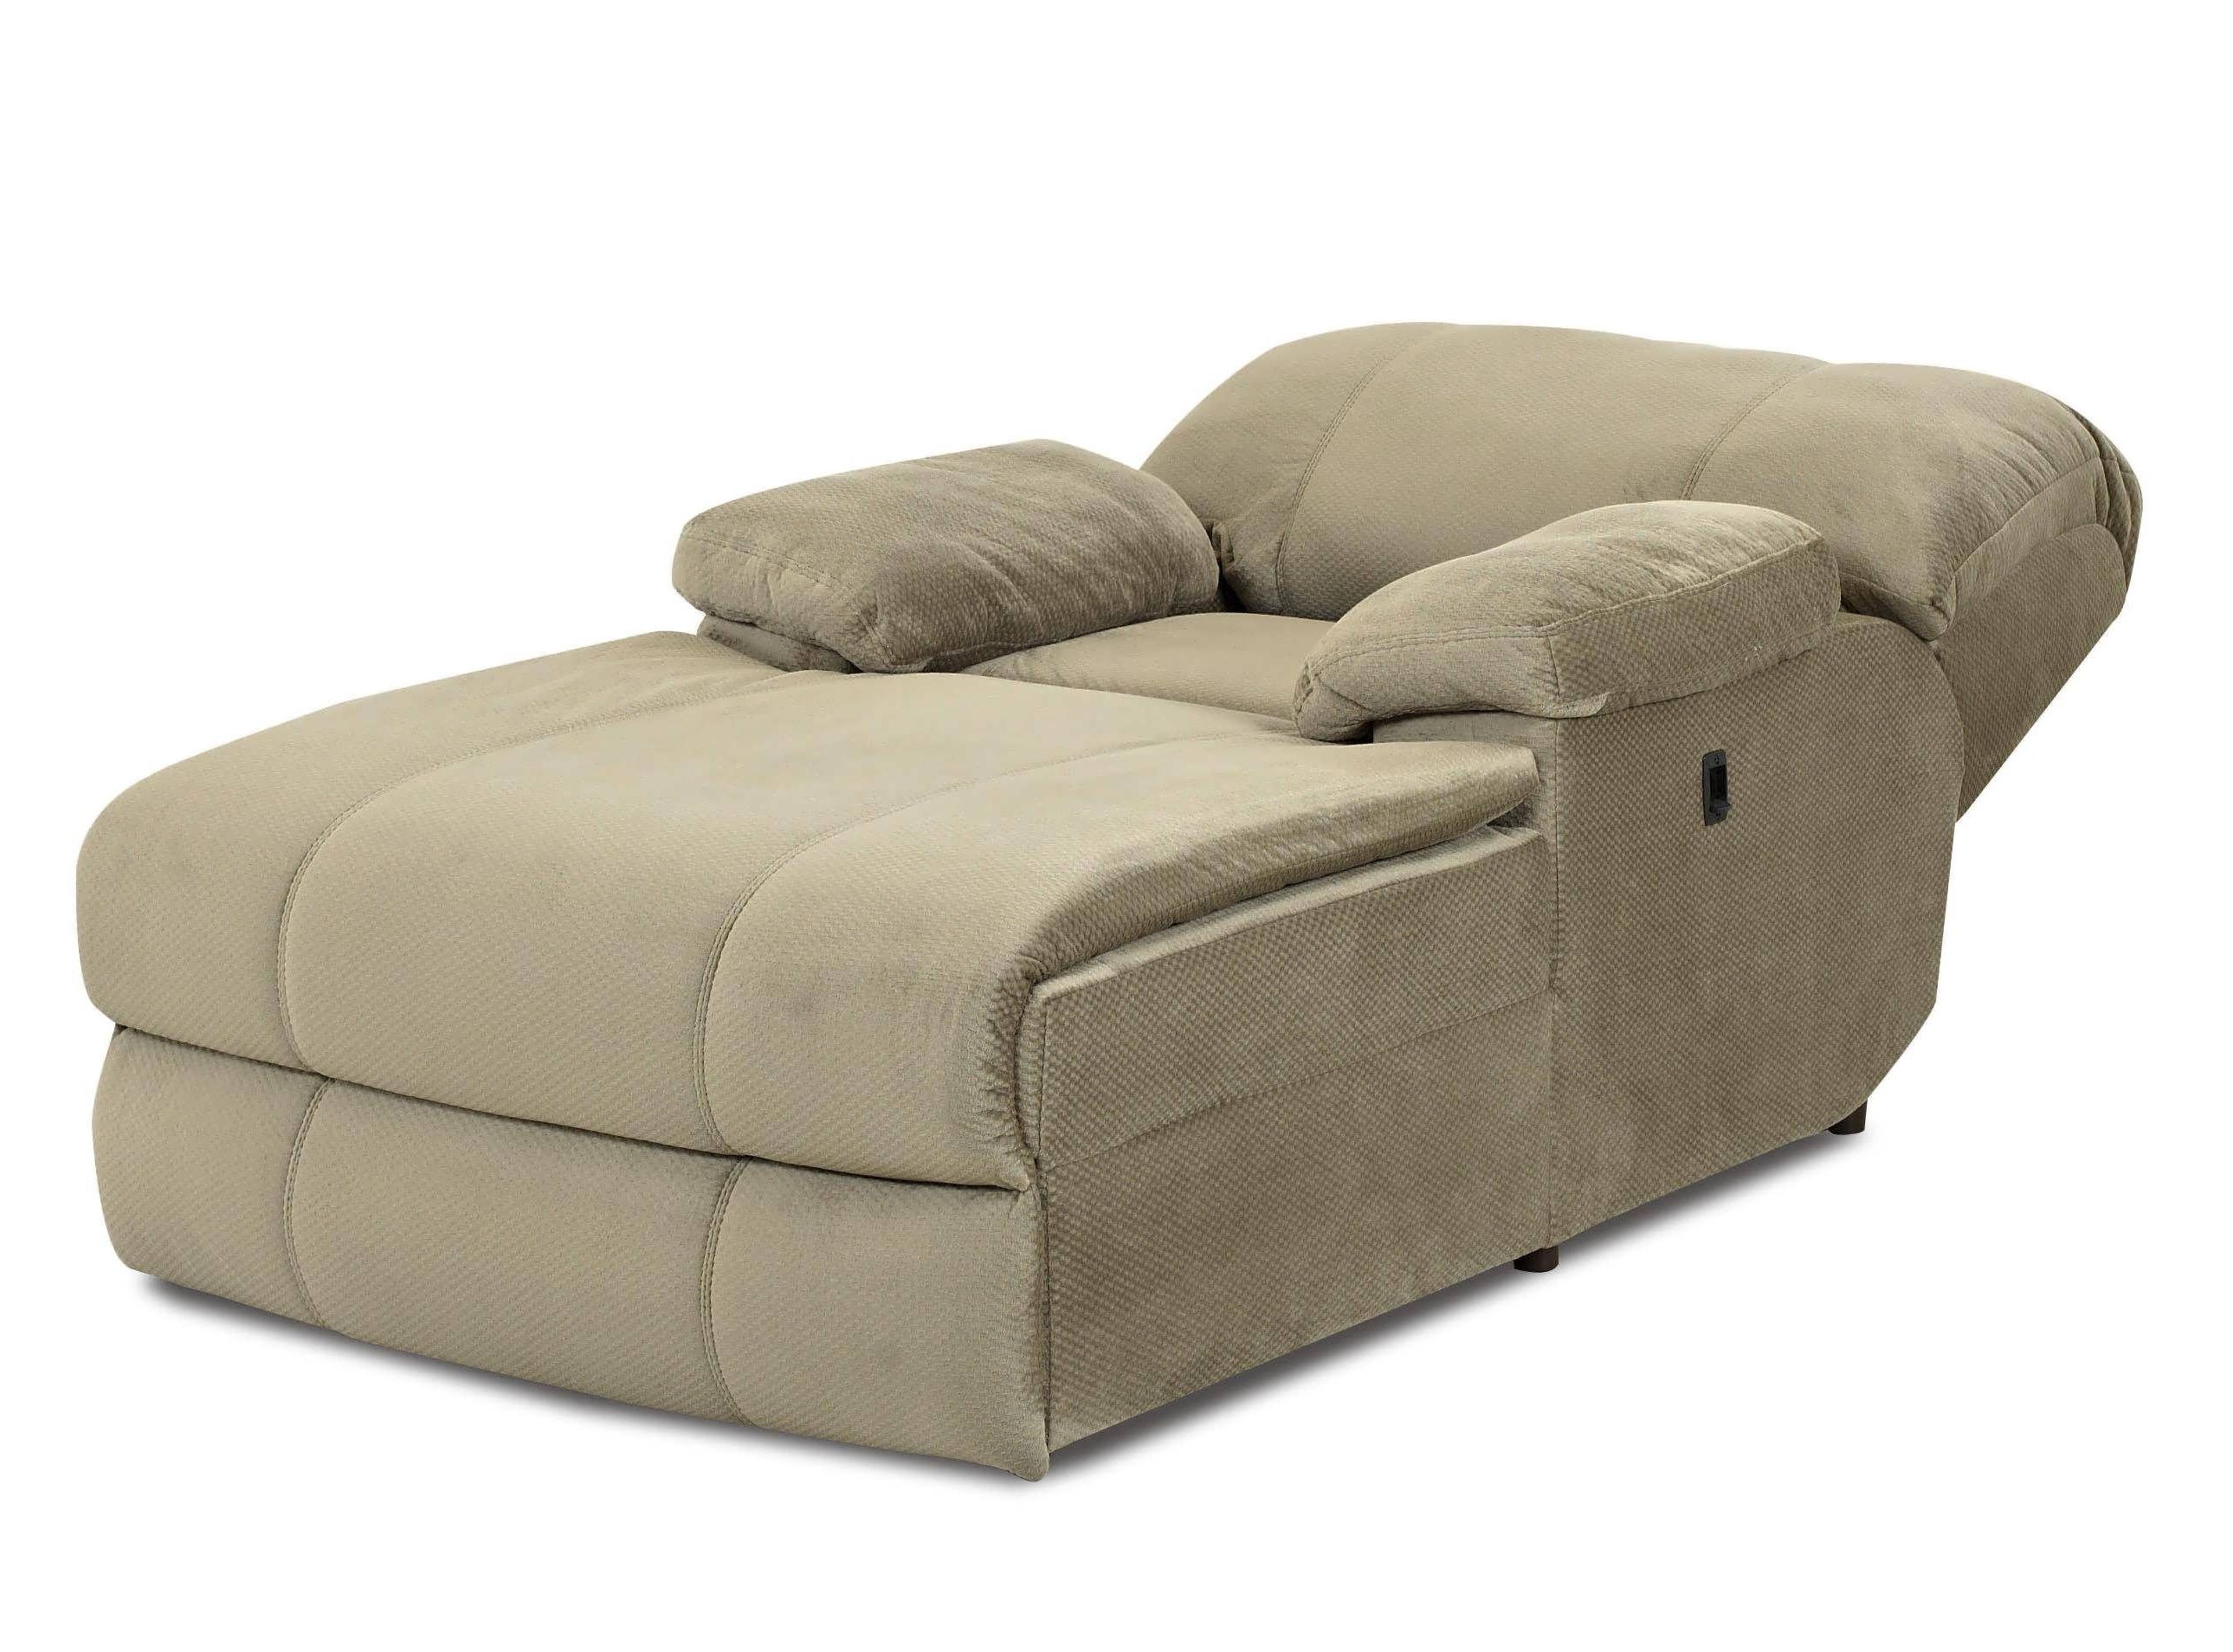 chaise lounge recliner chair sofa bed